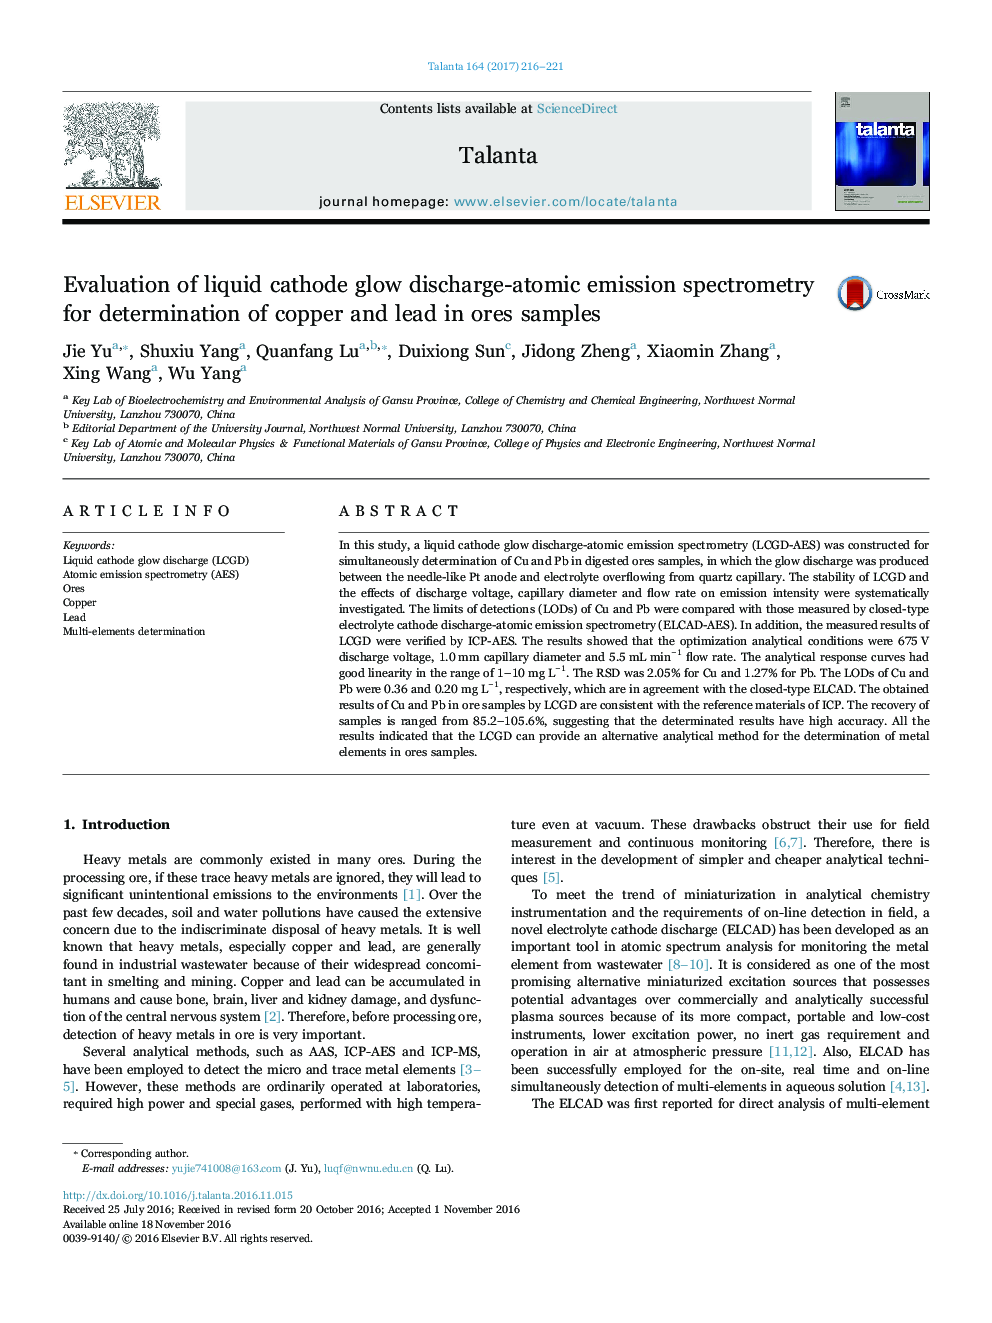 Evaluation of liquid cathode glow discharge-atomic emission spectrometry for determination of copper and lead in ores samples